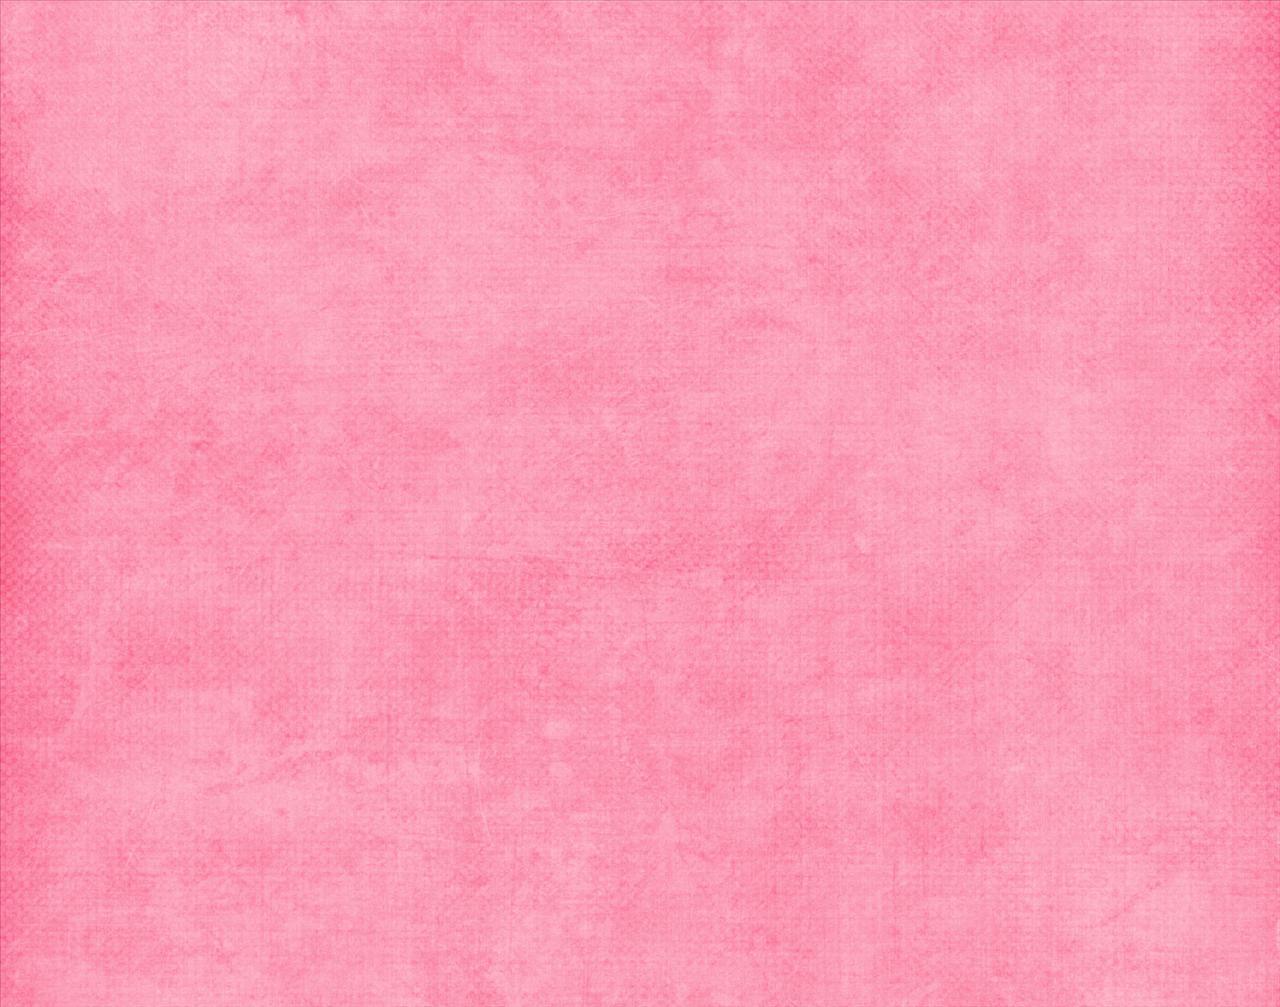 Wallpaper For > Cute Pink Background For Powerpoint